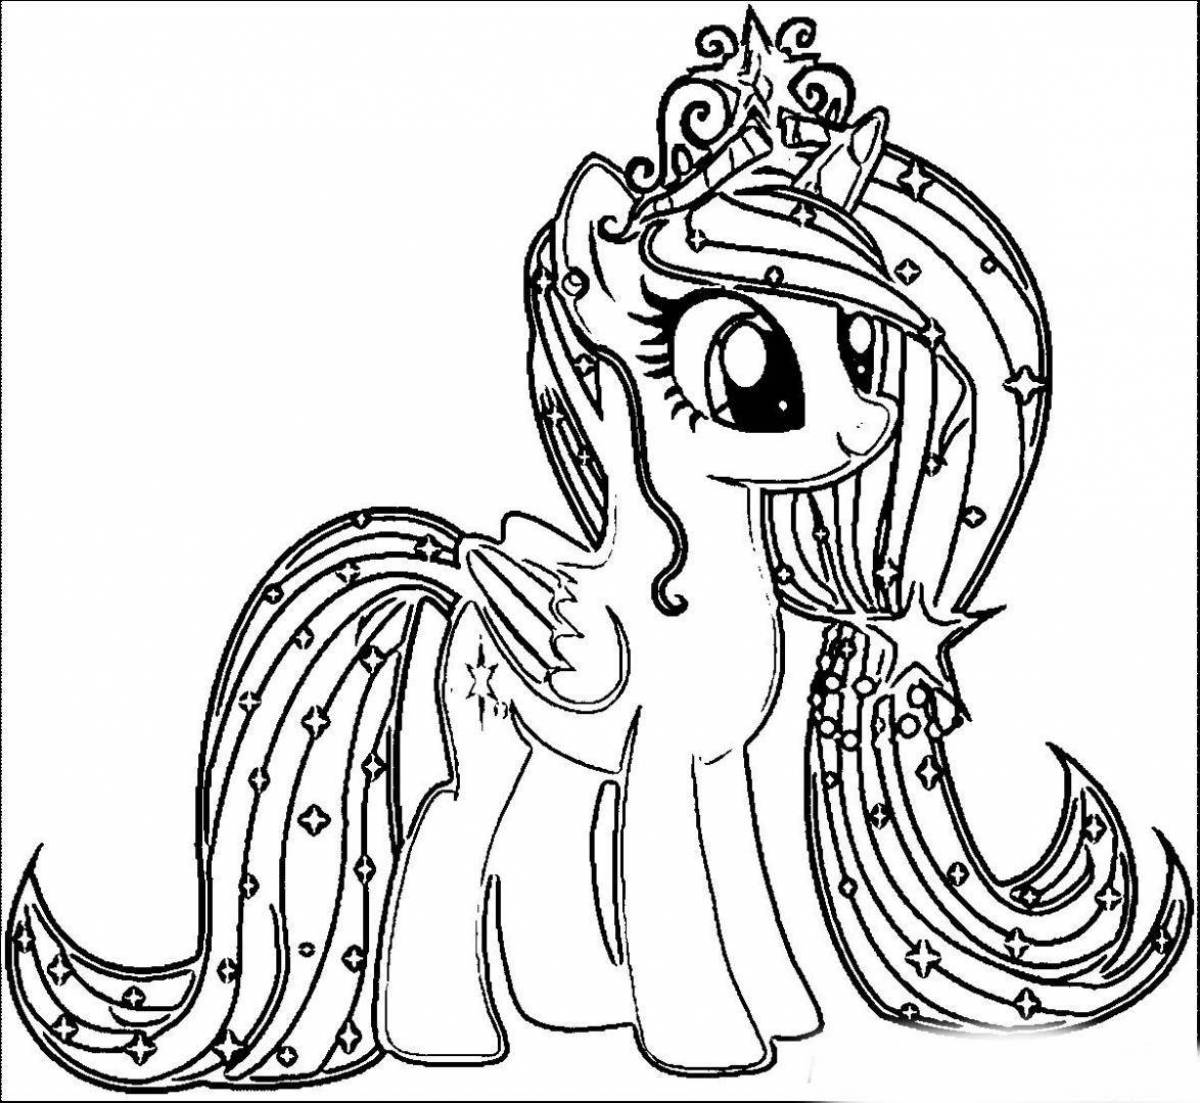 Adorable pony coloring book for 4-5 year olds